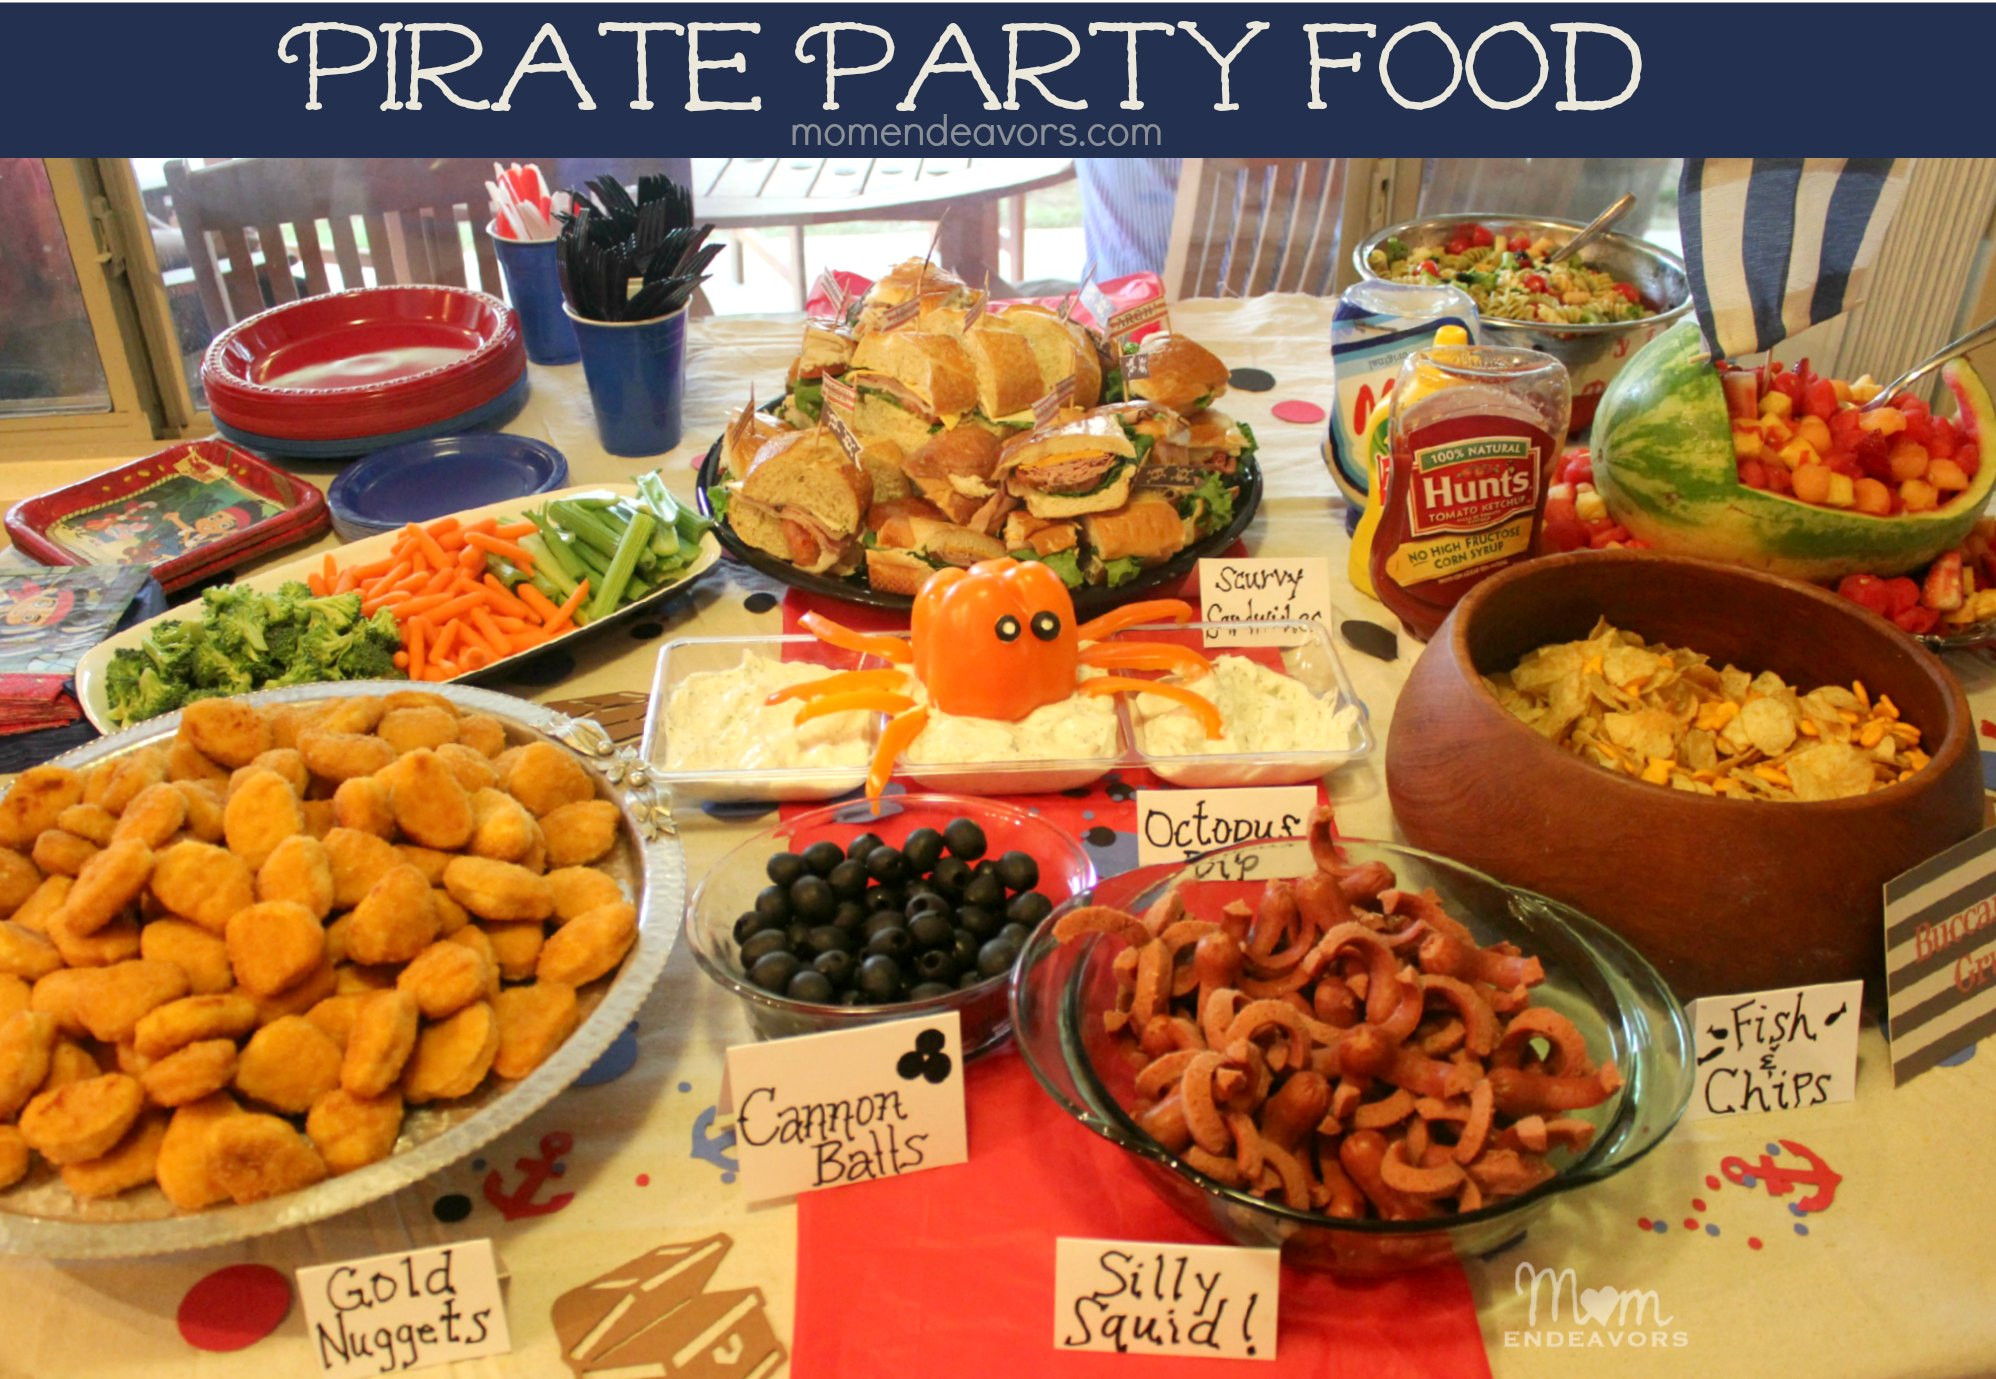 Kids Bday Party Snacks
 Jake and the Never Land Pirates Birthday Party Food